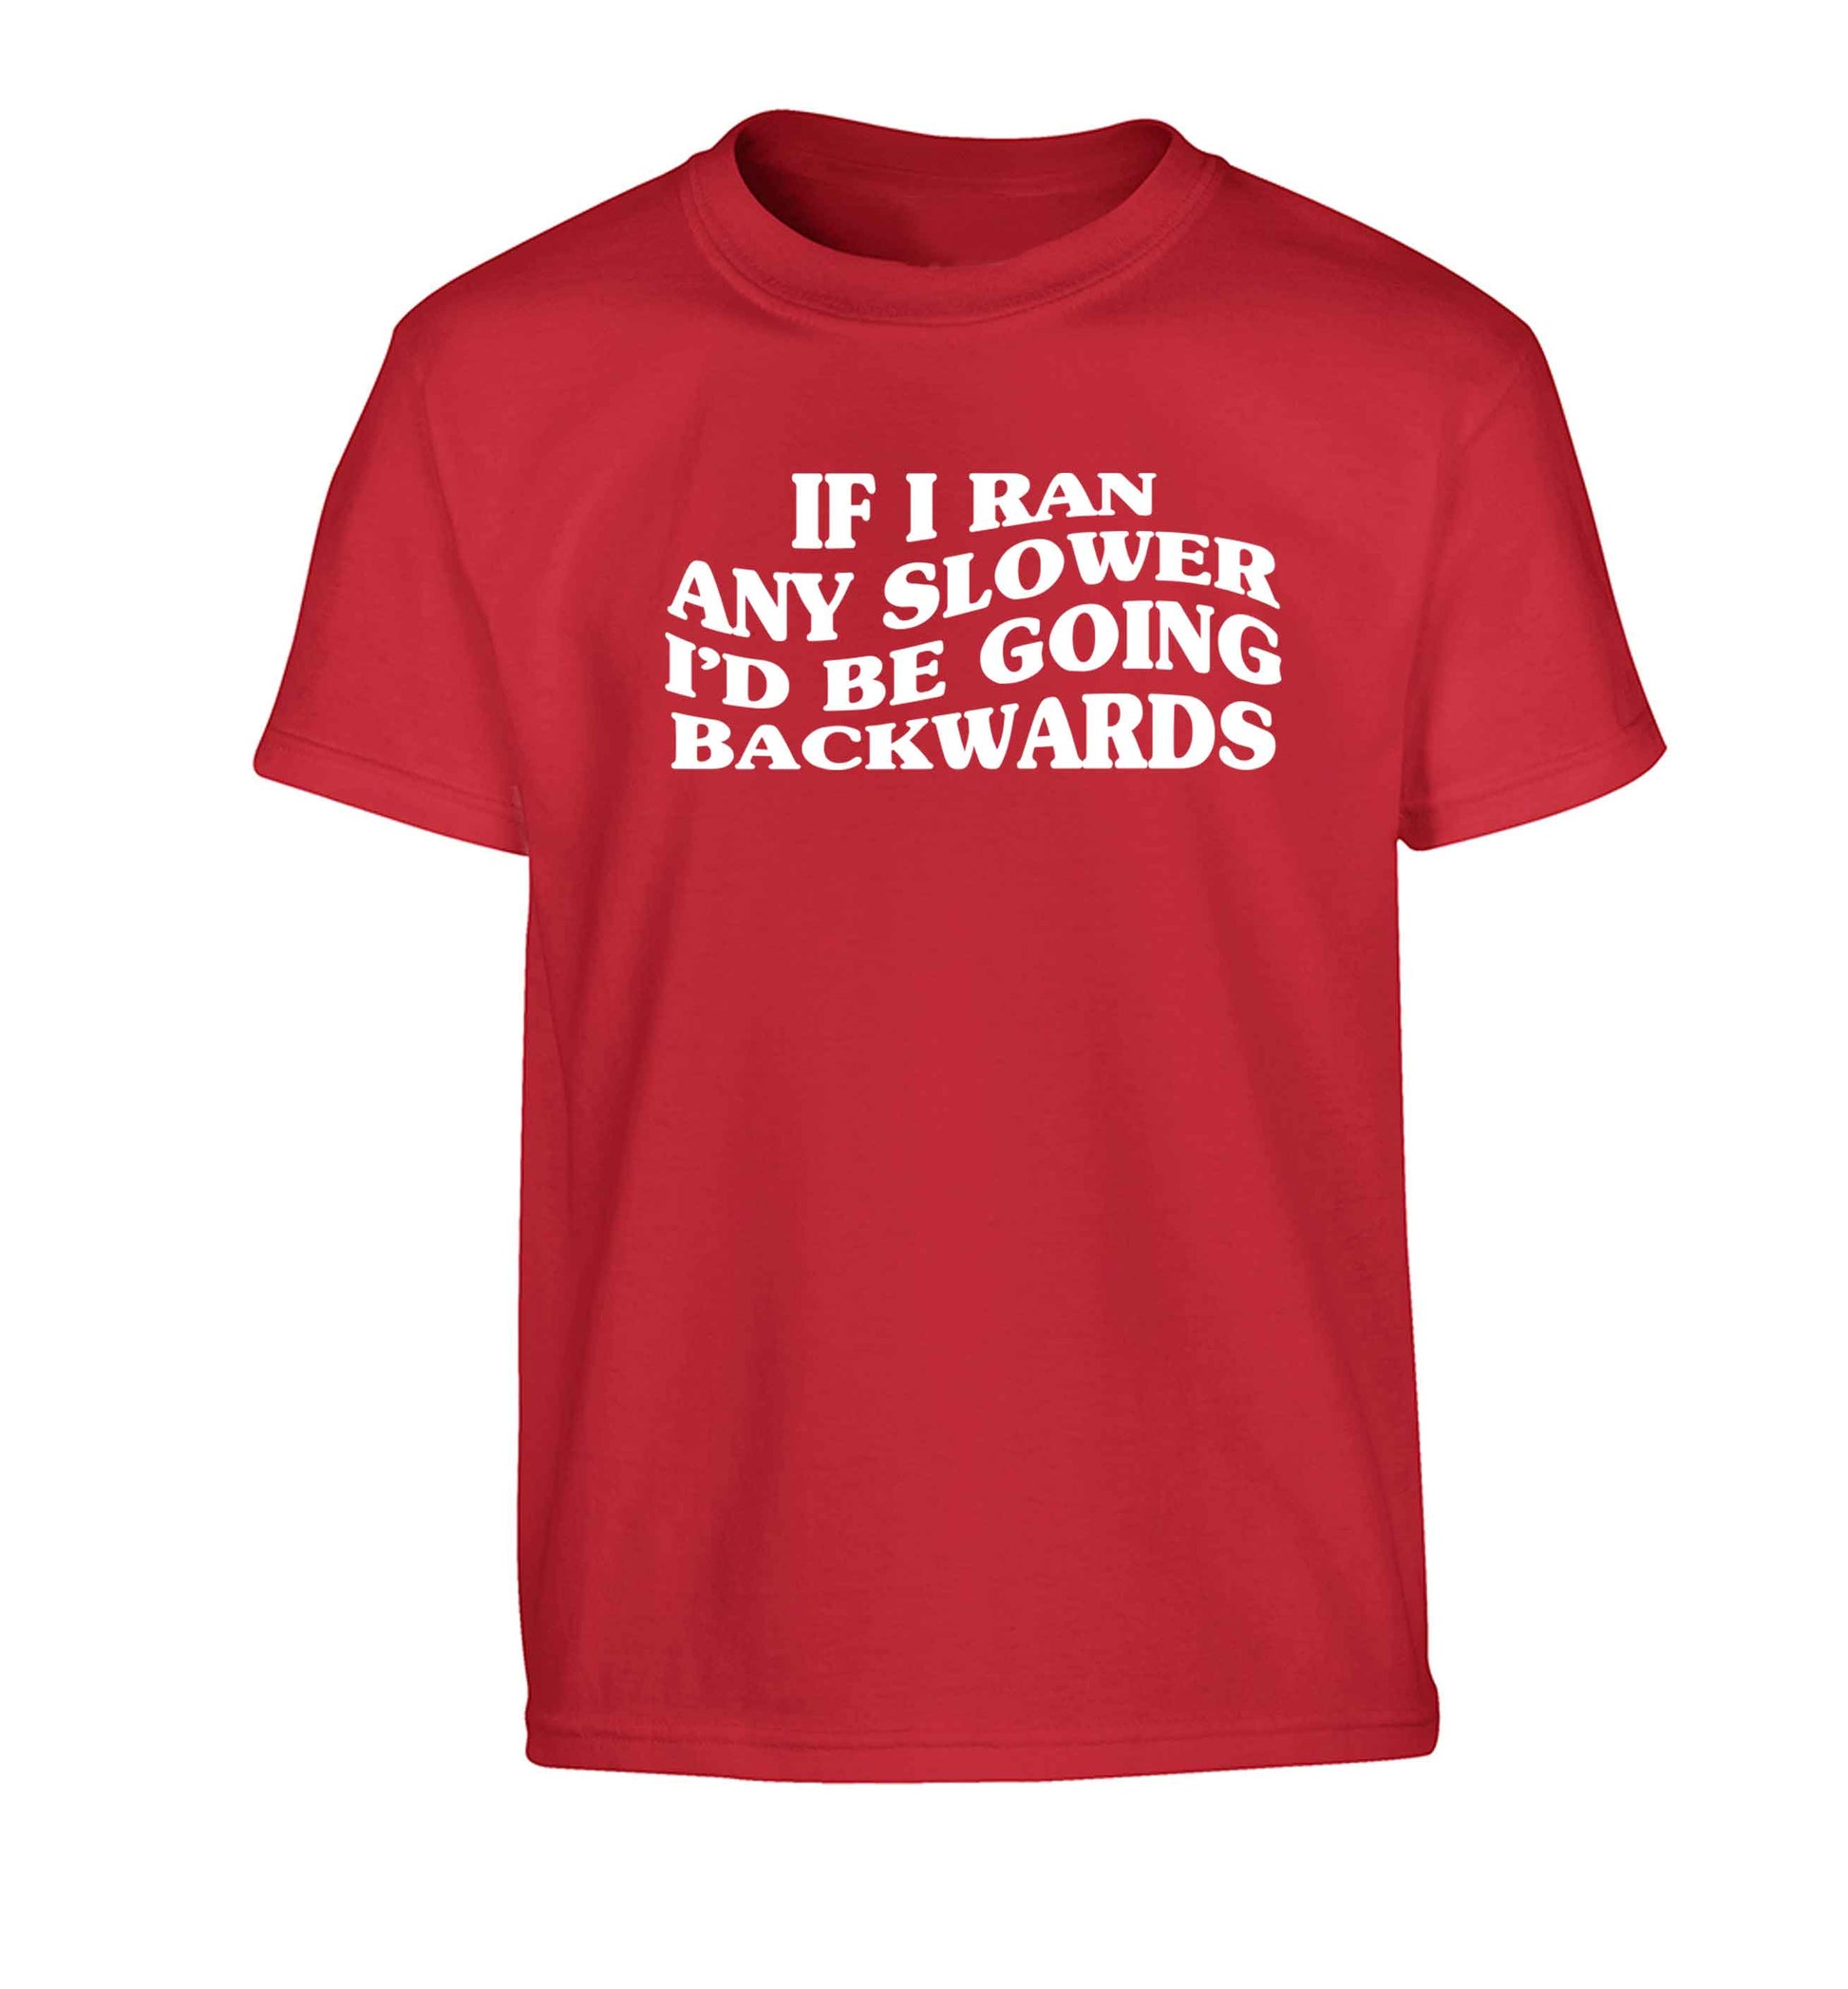 If I ran any slower I'd be going backwards Children's red Tshirt 12-13 Years